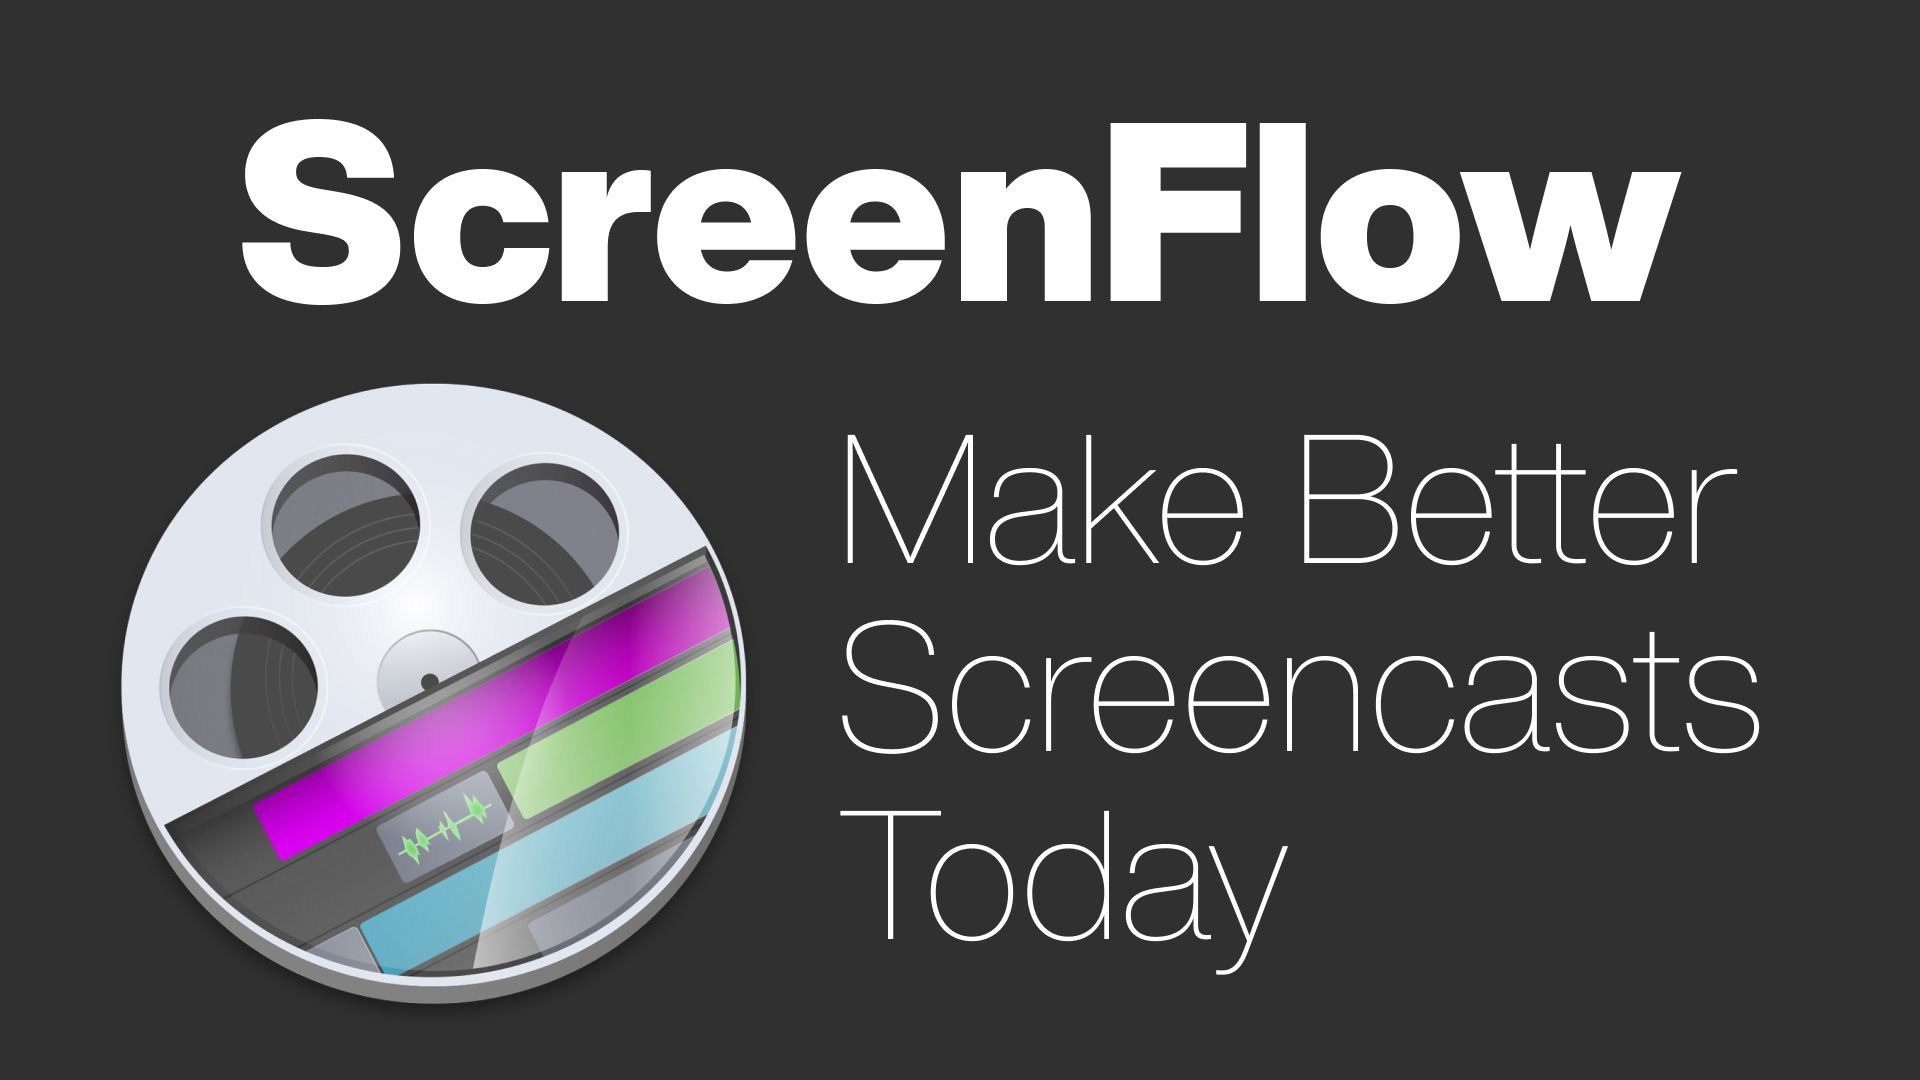 screenflow 10 review